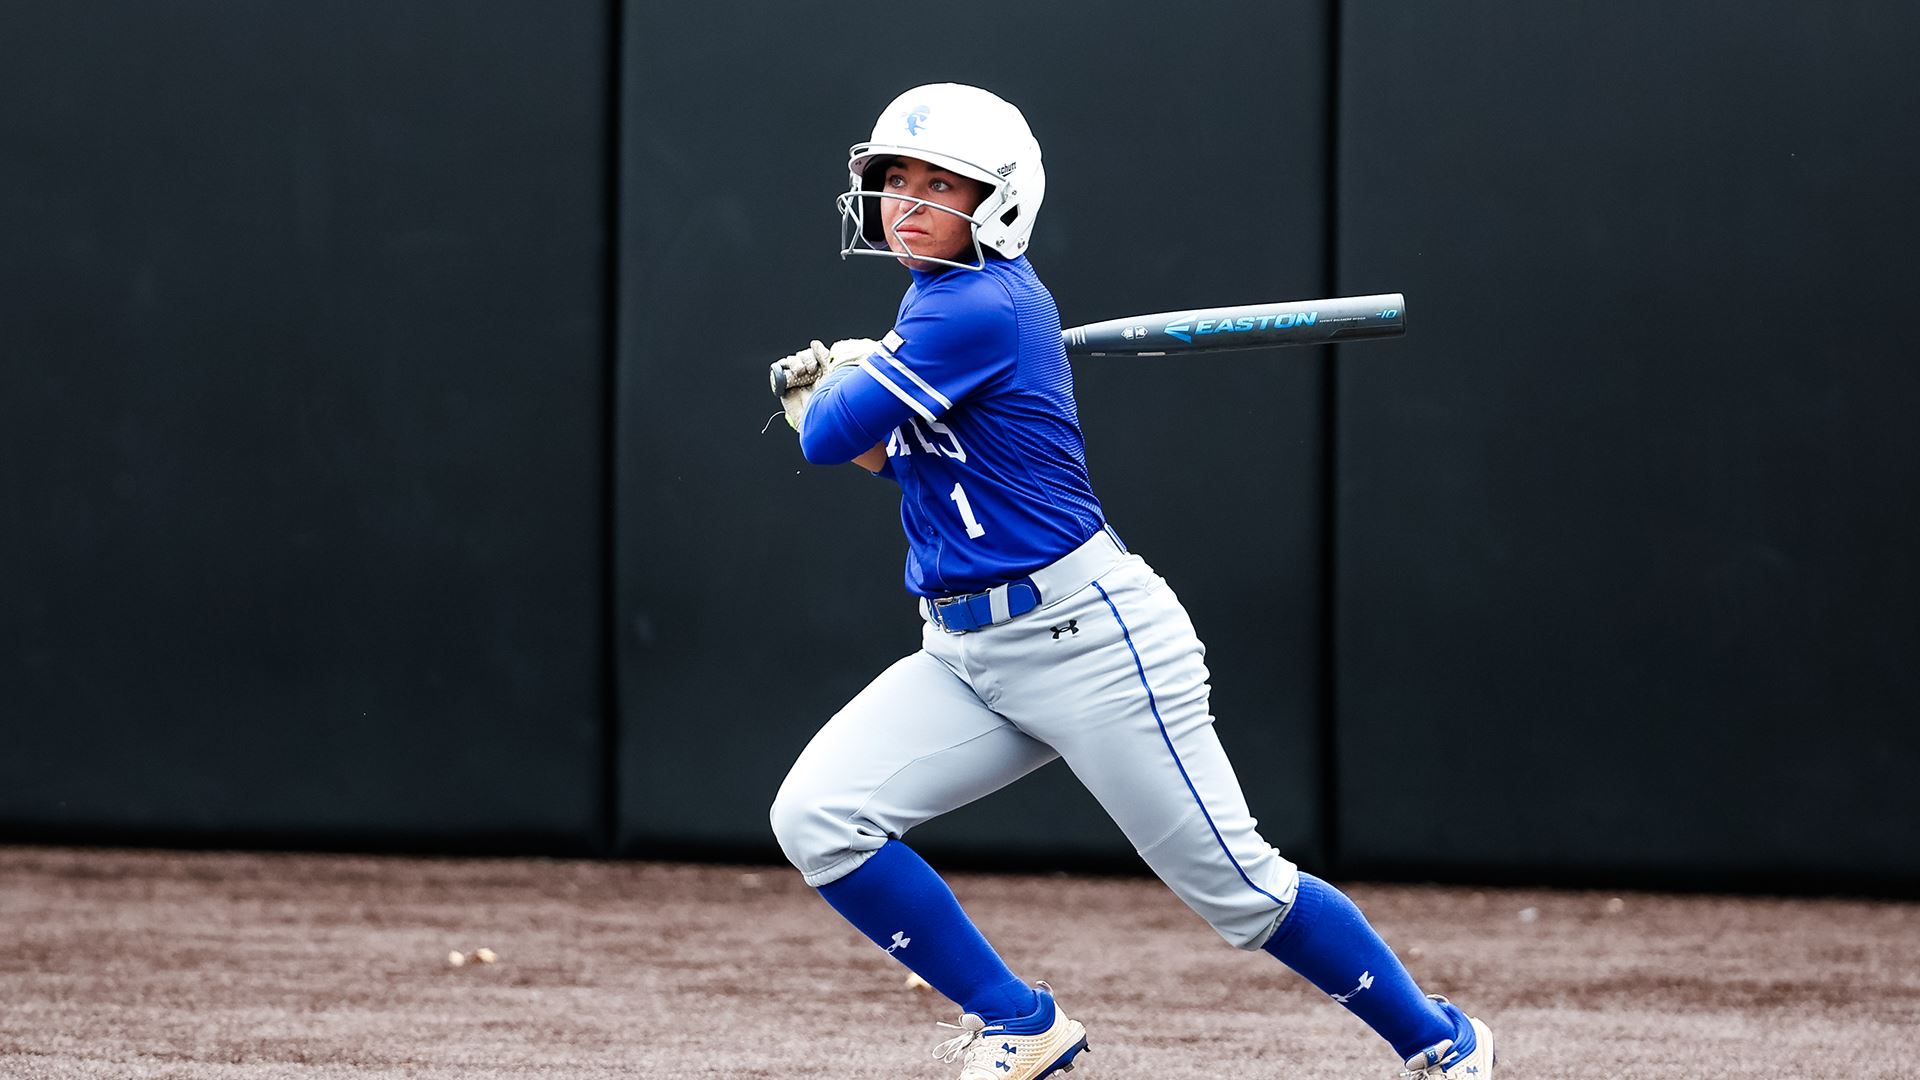 A Seton Hall softball batter stands at the plate during a game.